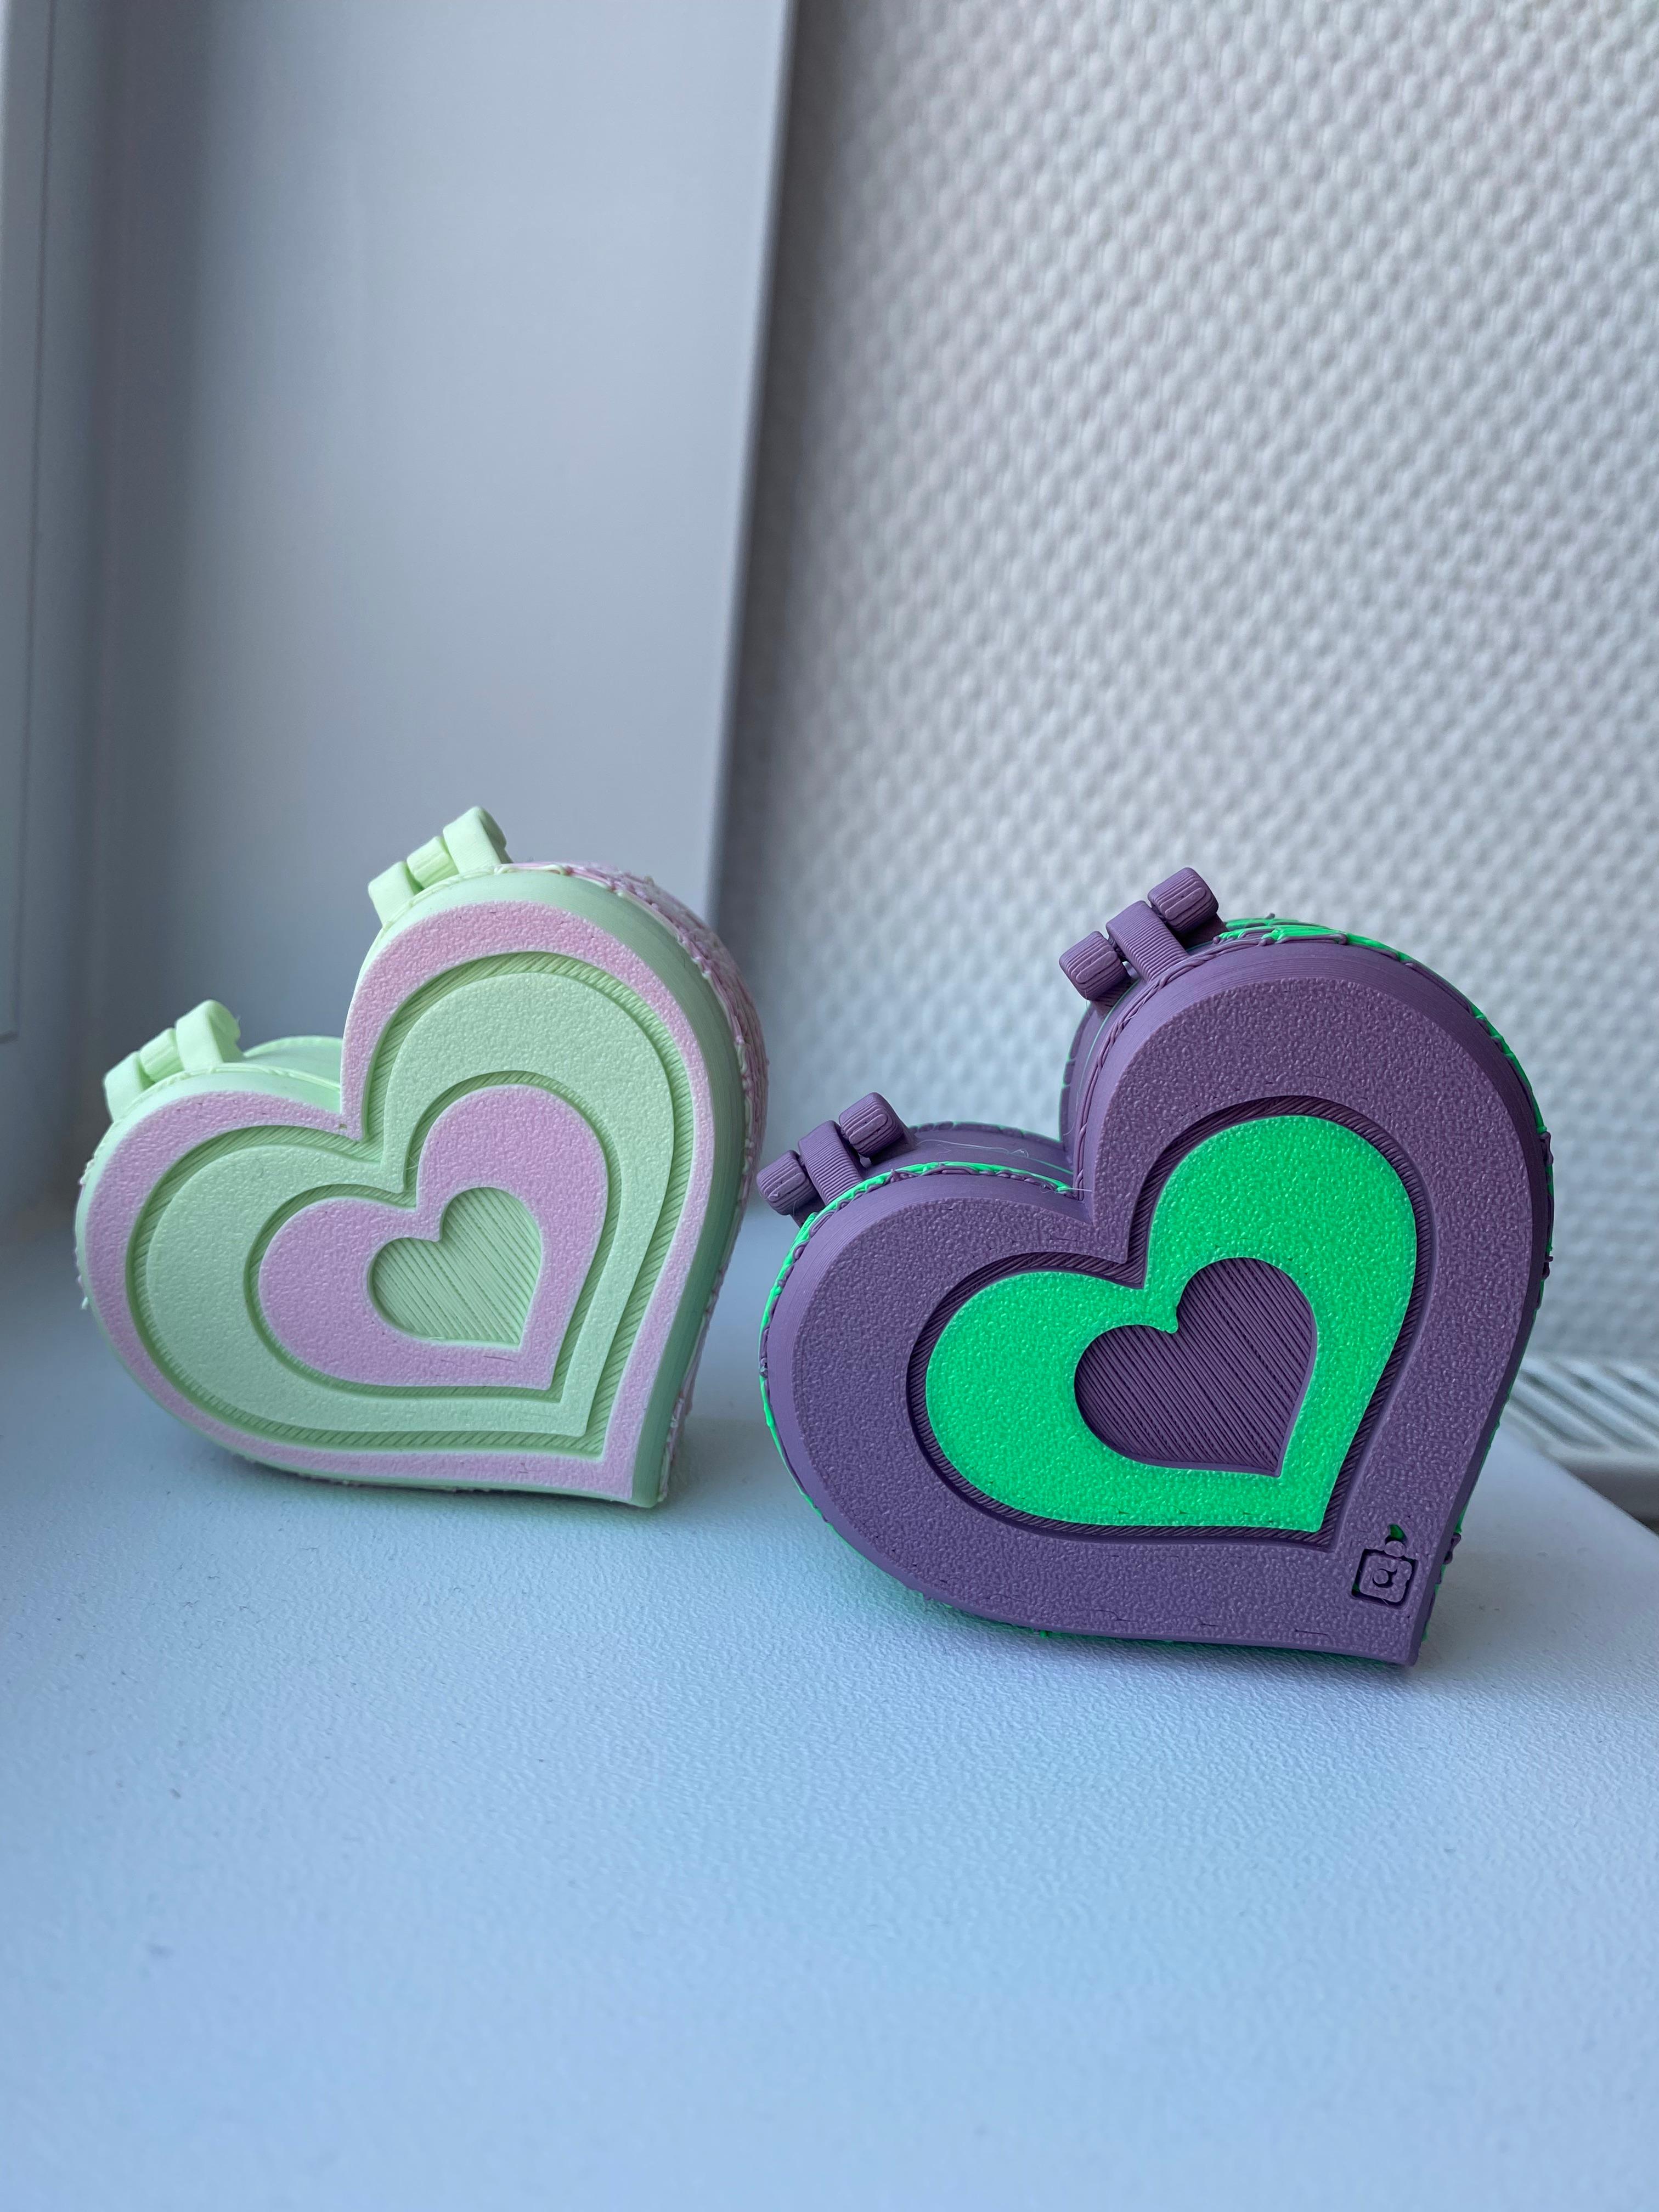 Valentine's Heart Shaped Box (Remix of Simple Heart Box with Lid) - Made it in 2 different color combo's
Left one is Polymaker mint and sakura pink.
Love it!!! - 3d model